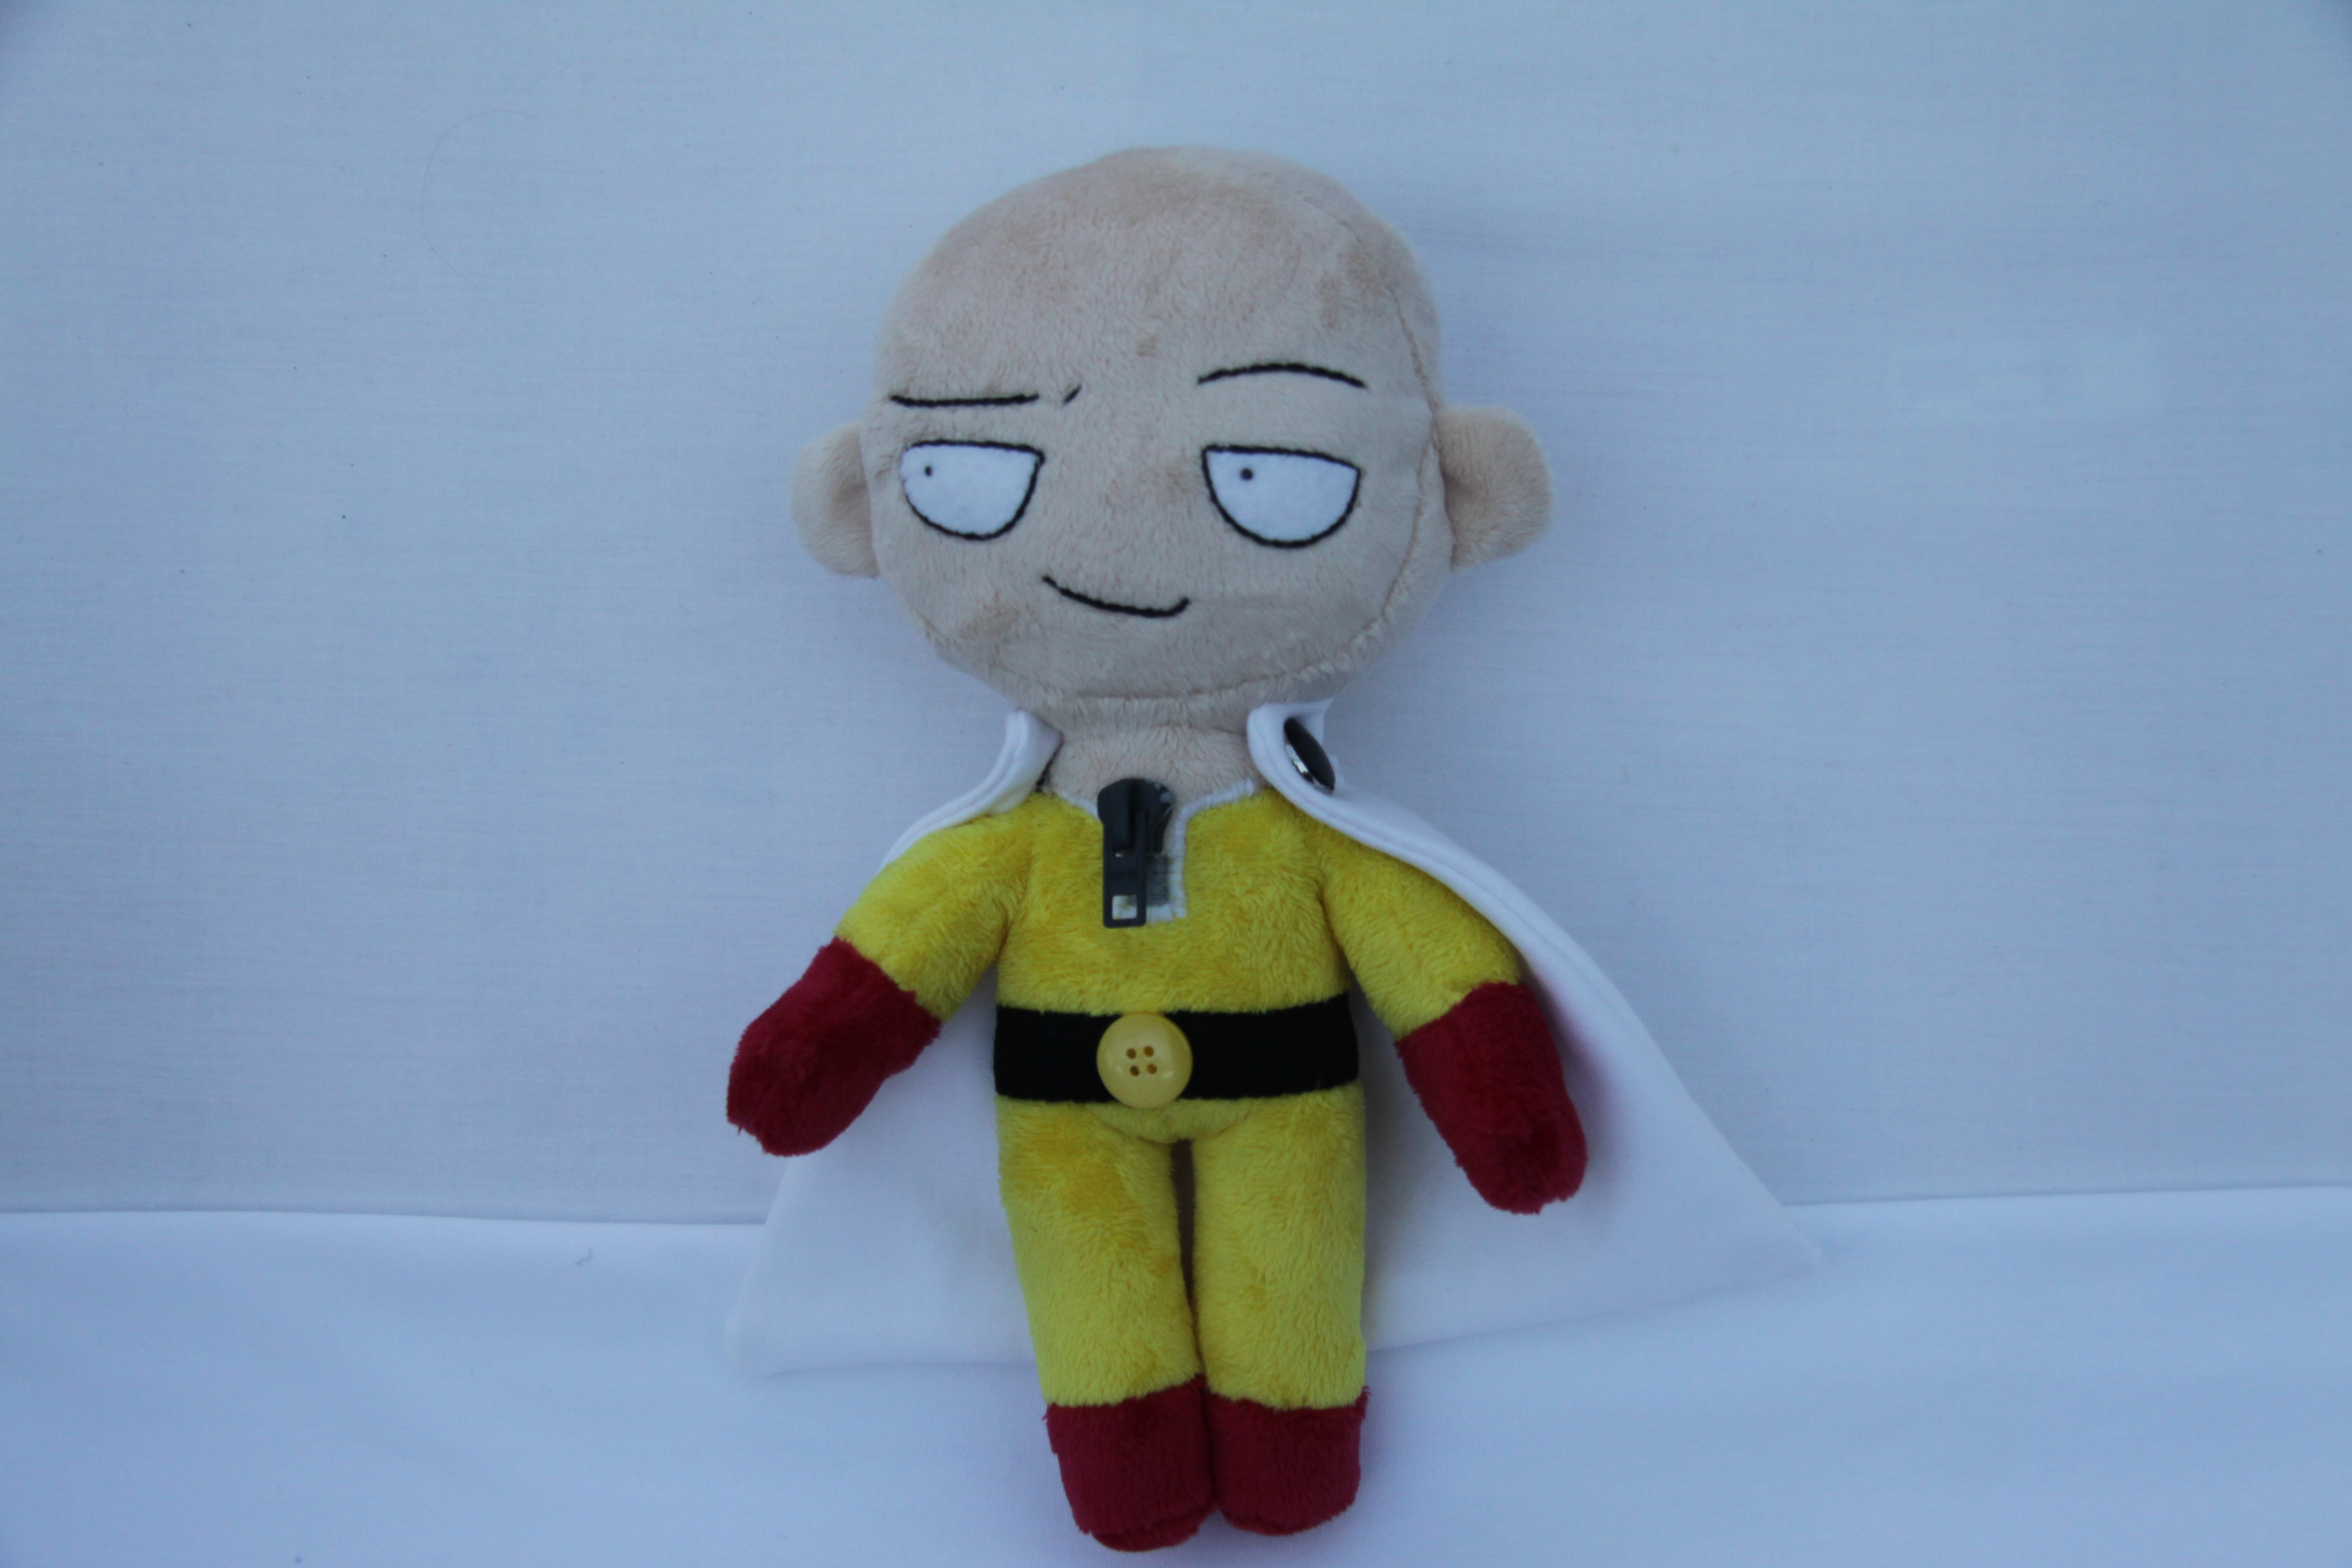 a plush of Saitama, a bald man wearing a yellow jumpsuit with a white cape held by black buttons. The jumpsuit is accented by a black belt with a yellow button buckle, and a grey front zipper.